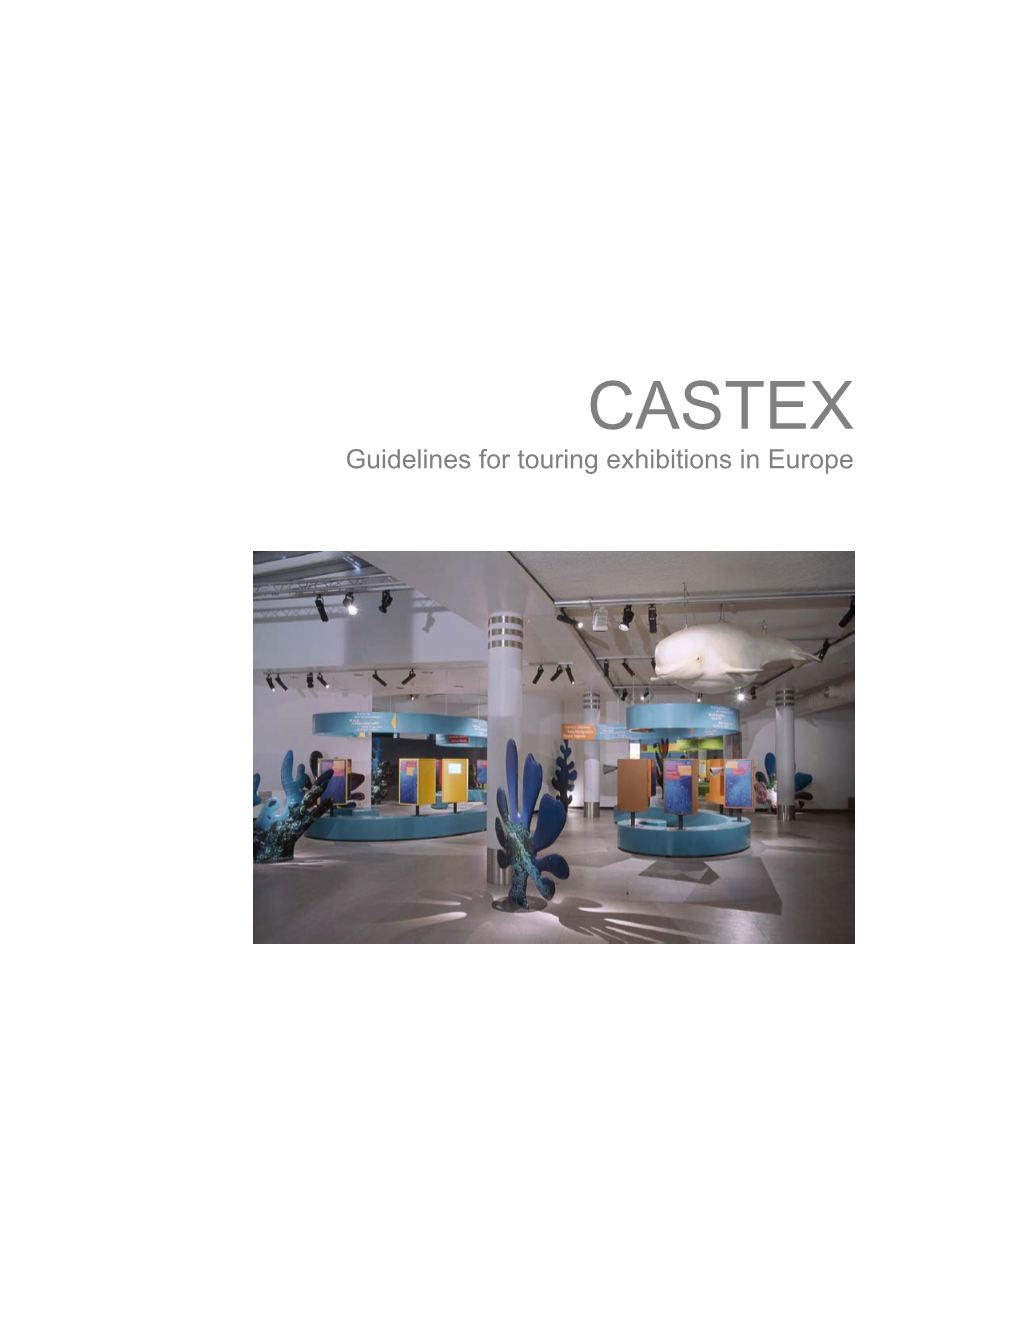 CASTEX Guidelines for Touring Exhibitions in Europe